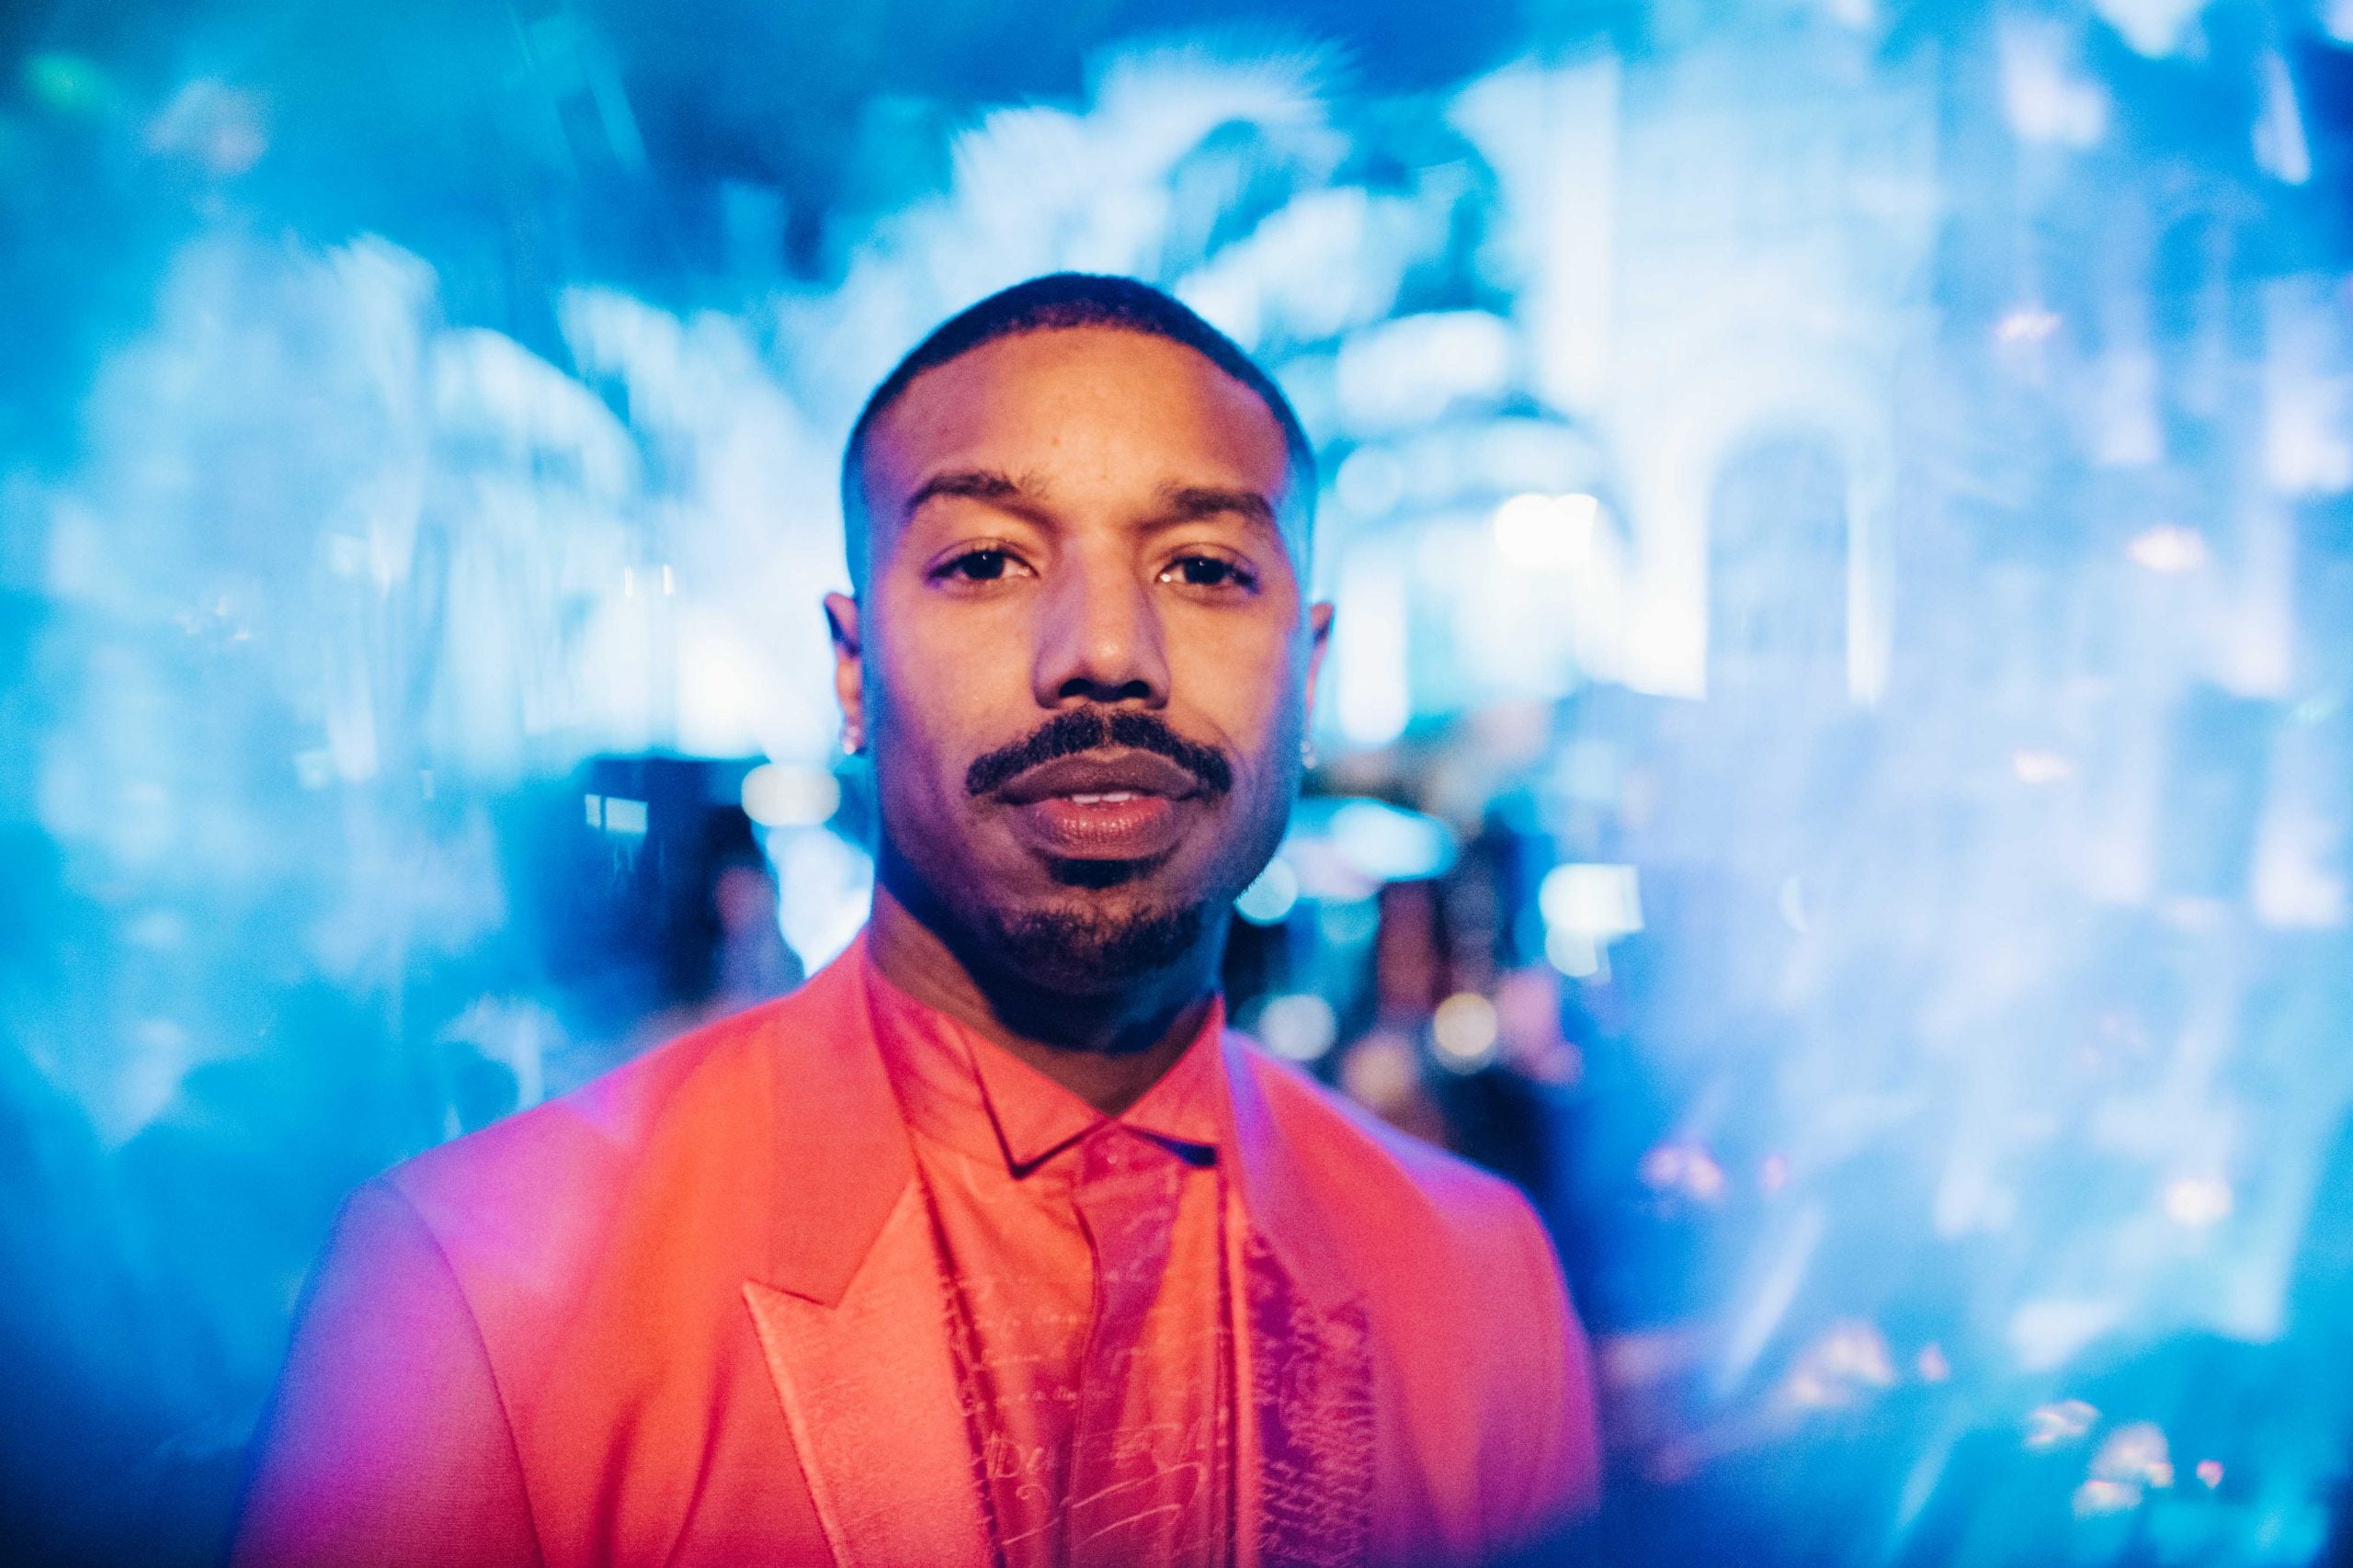 31 Photos Of Michael B. Jordan Looking So Good You Can't Help But Stare